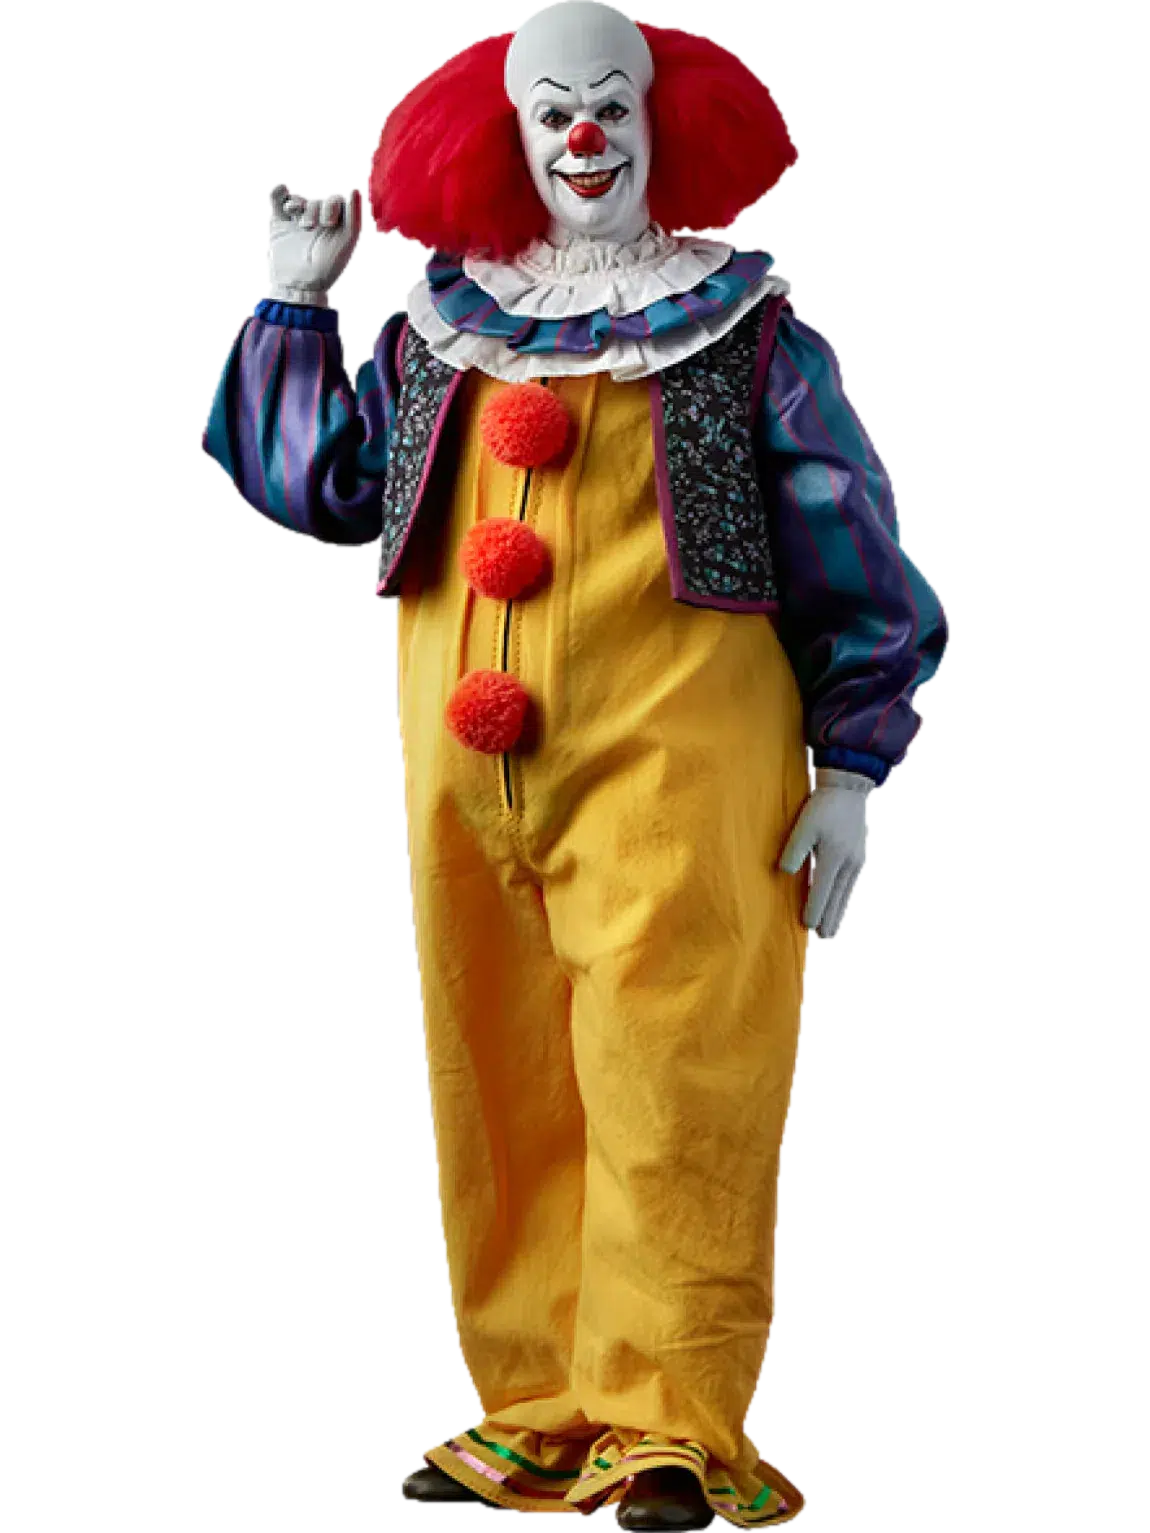 IT: Pennywise: 1990: Sixth Scale Figure: Sideshow